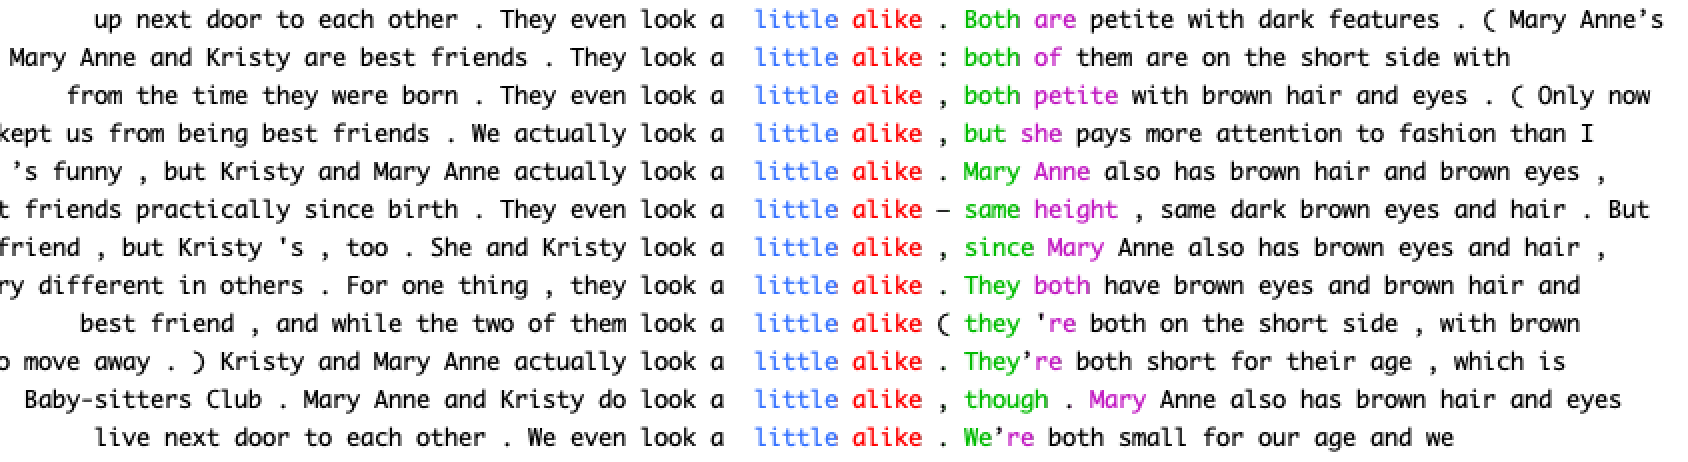 AntConc results for 'look a little alike'